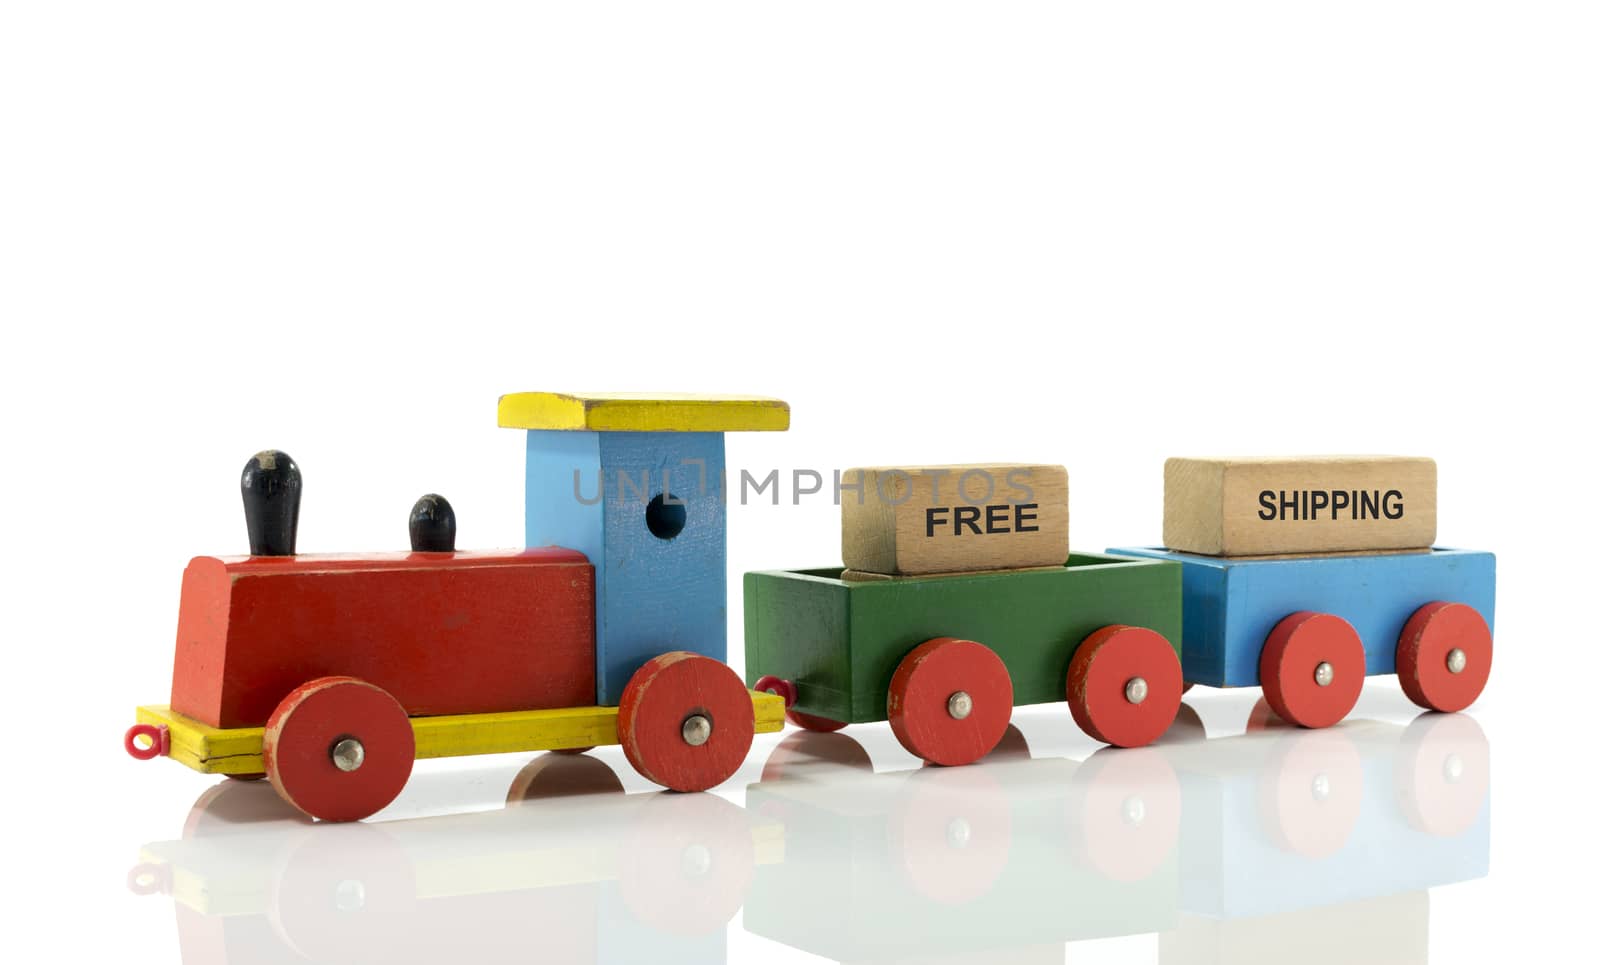 locomotive train with free shipping blocks by compuinfoto